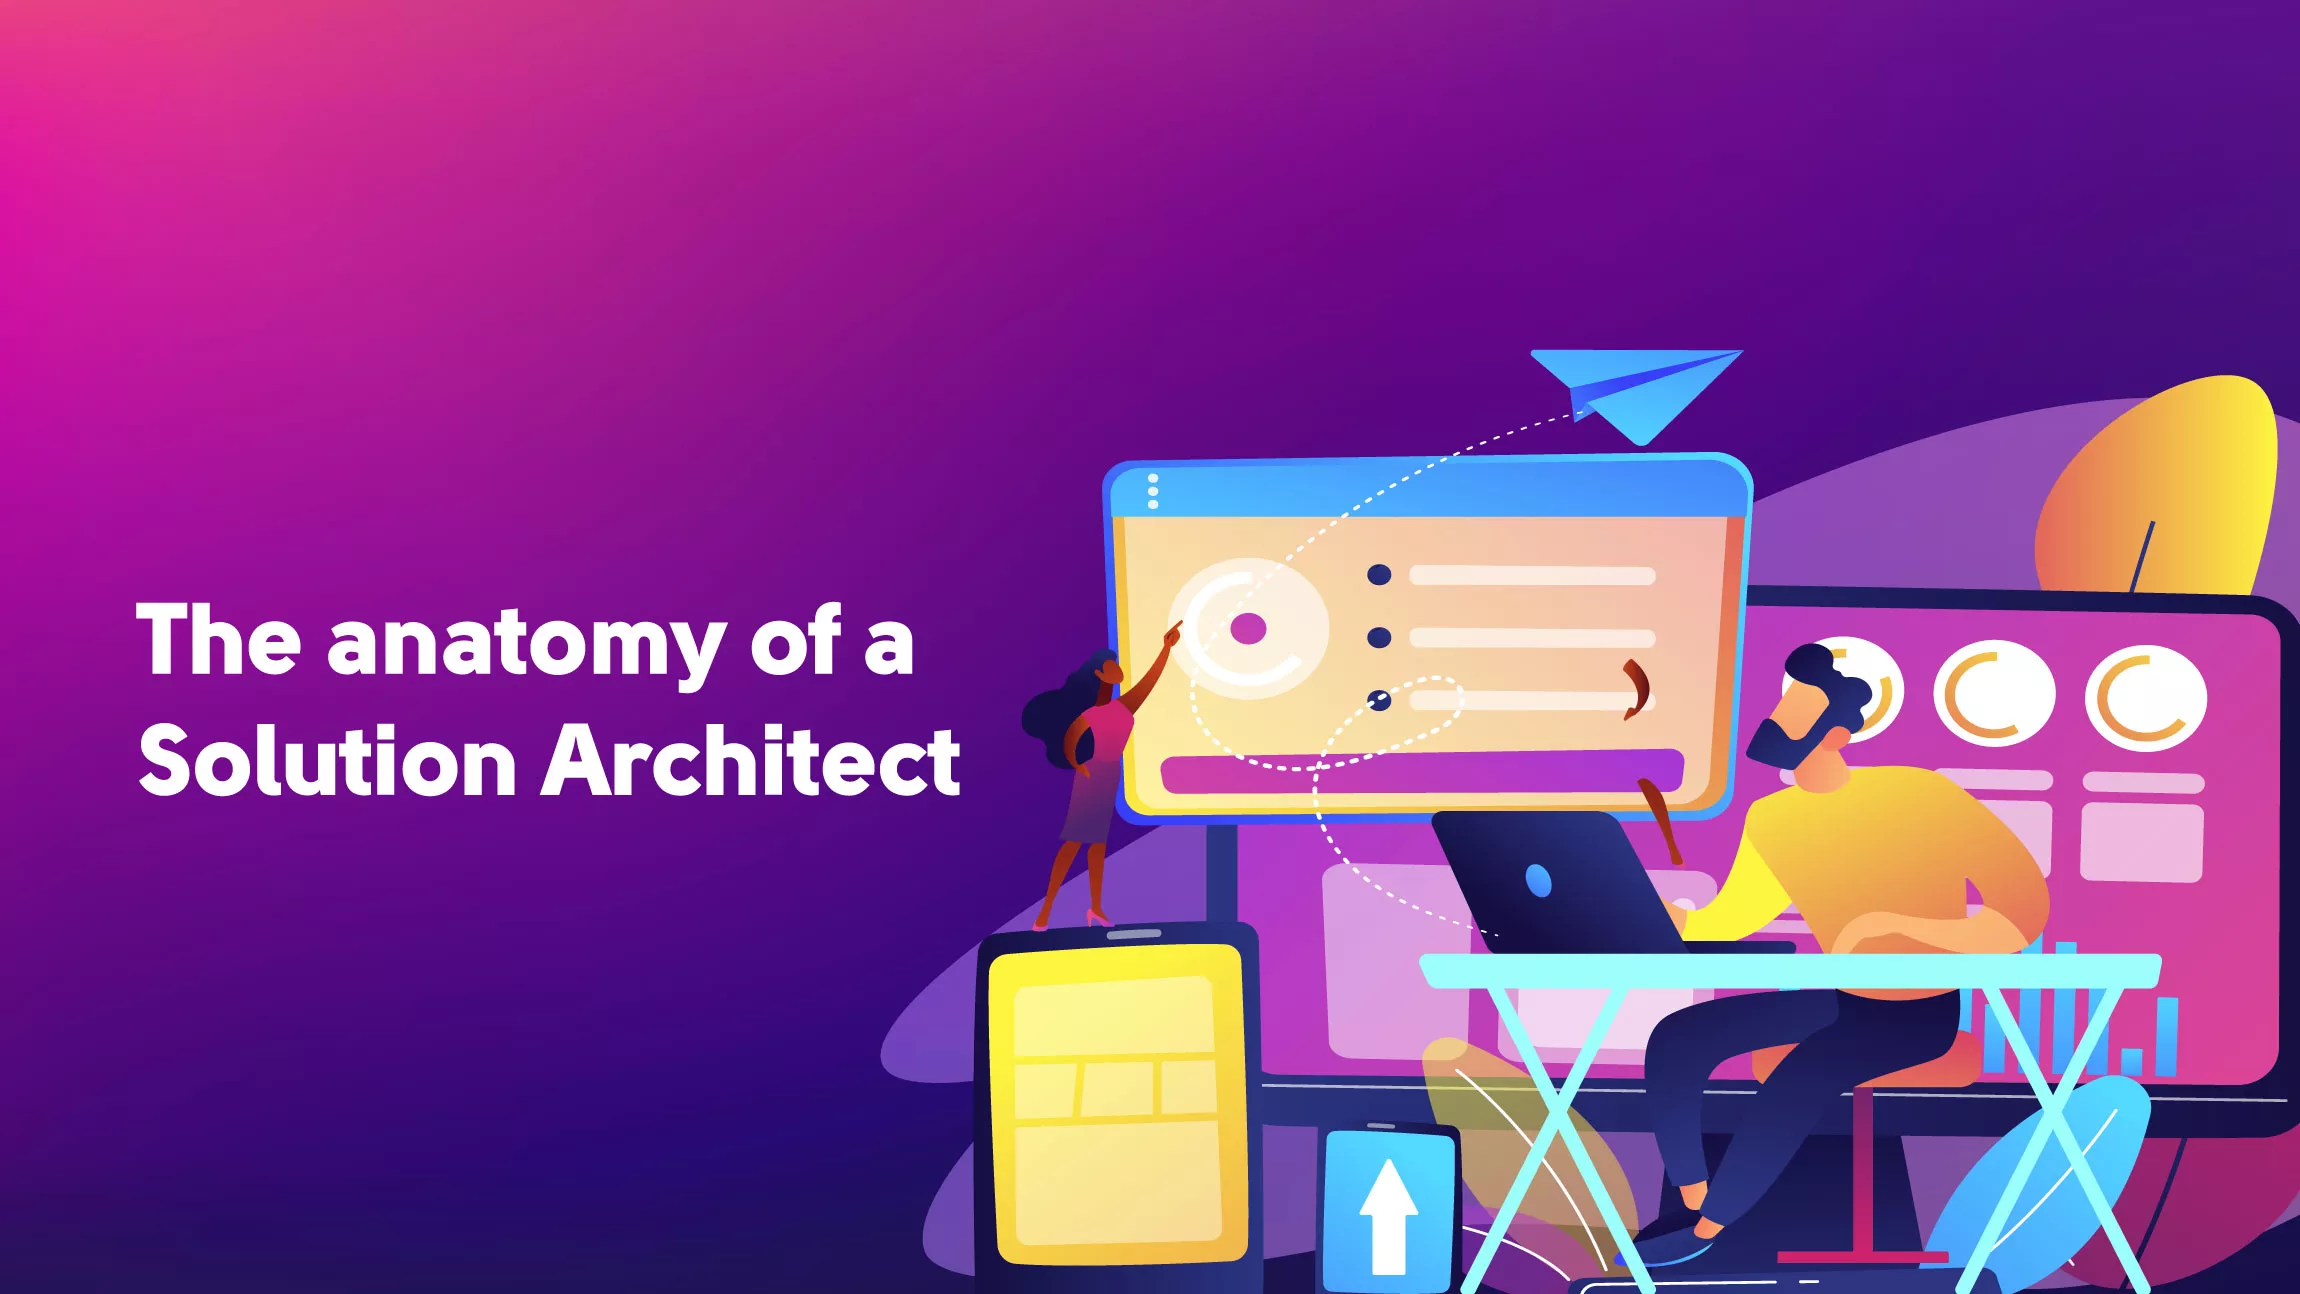 The anatomy of a Solution Architect